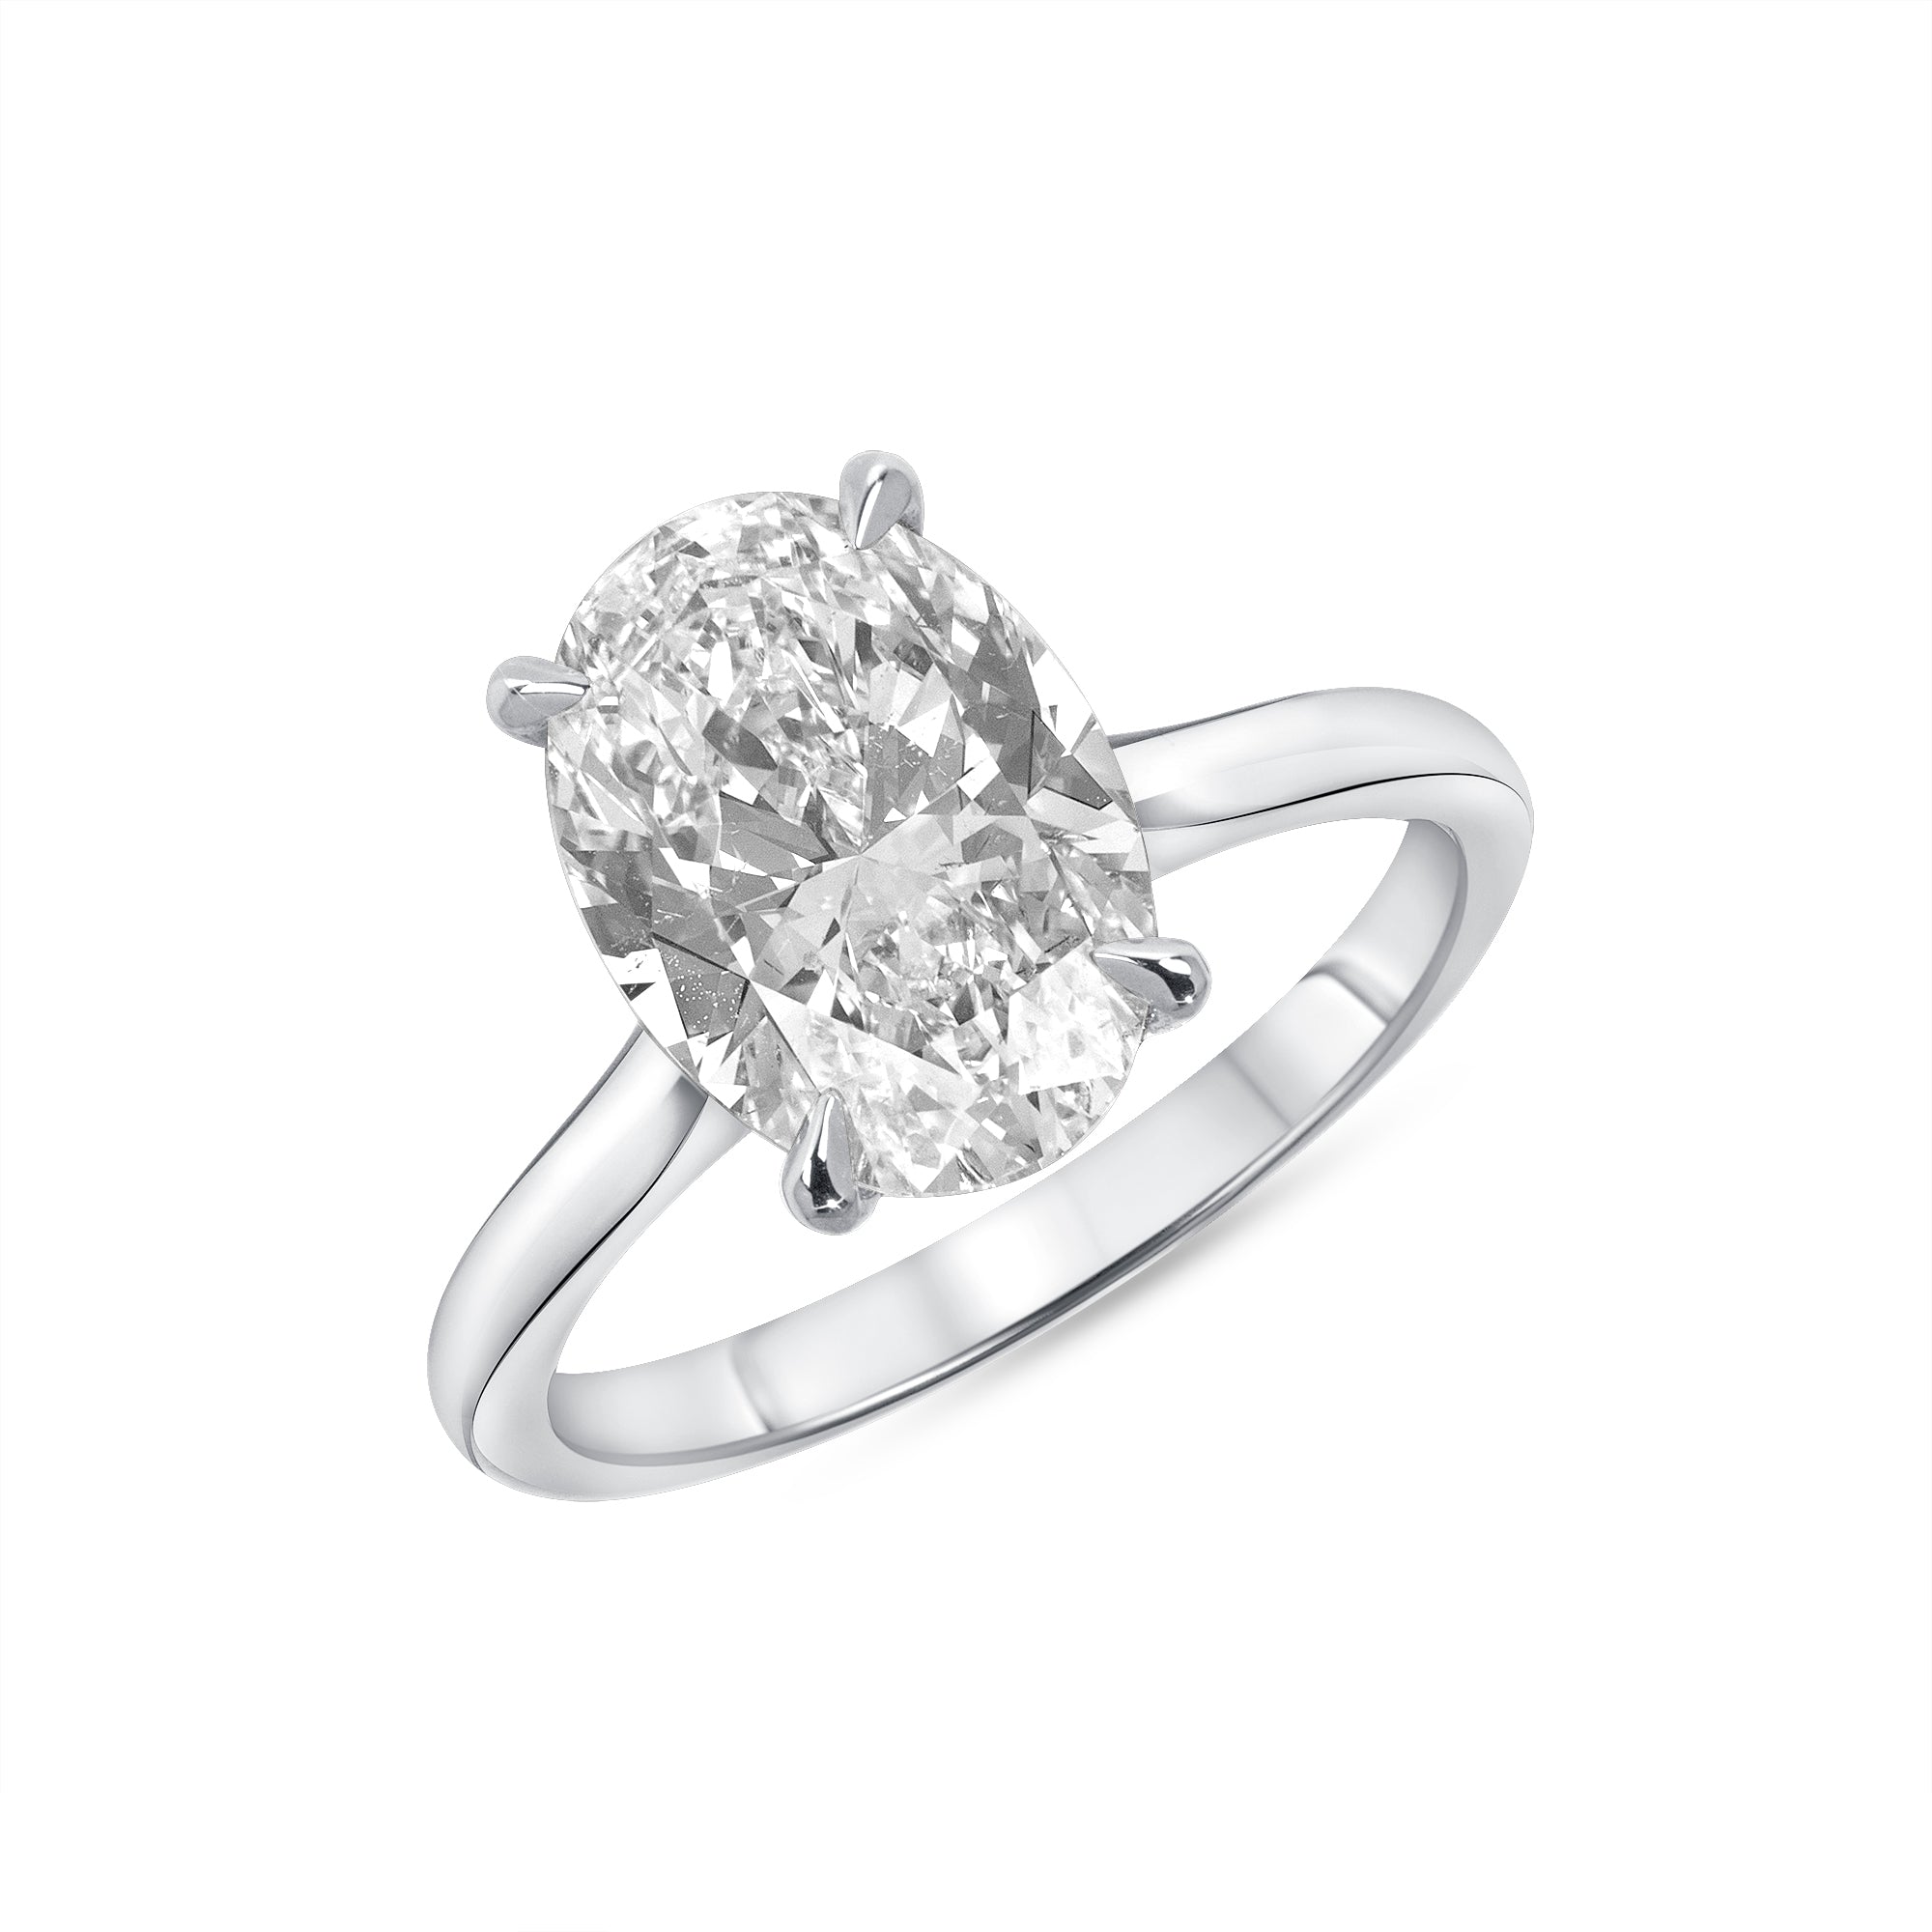 3.51ct Oval Cut Diamond Solitaire Ring in Platinum Band, GIA Certified